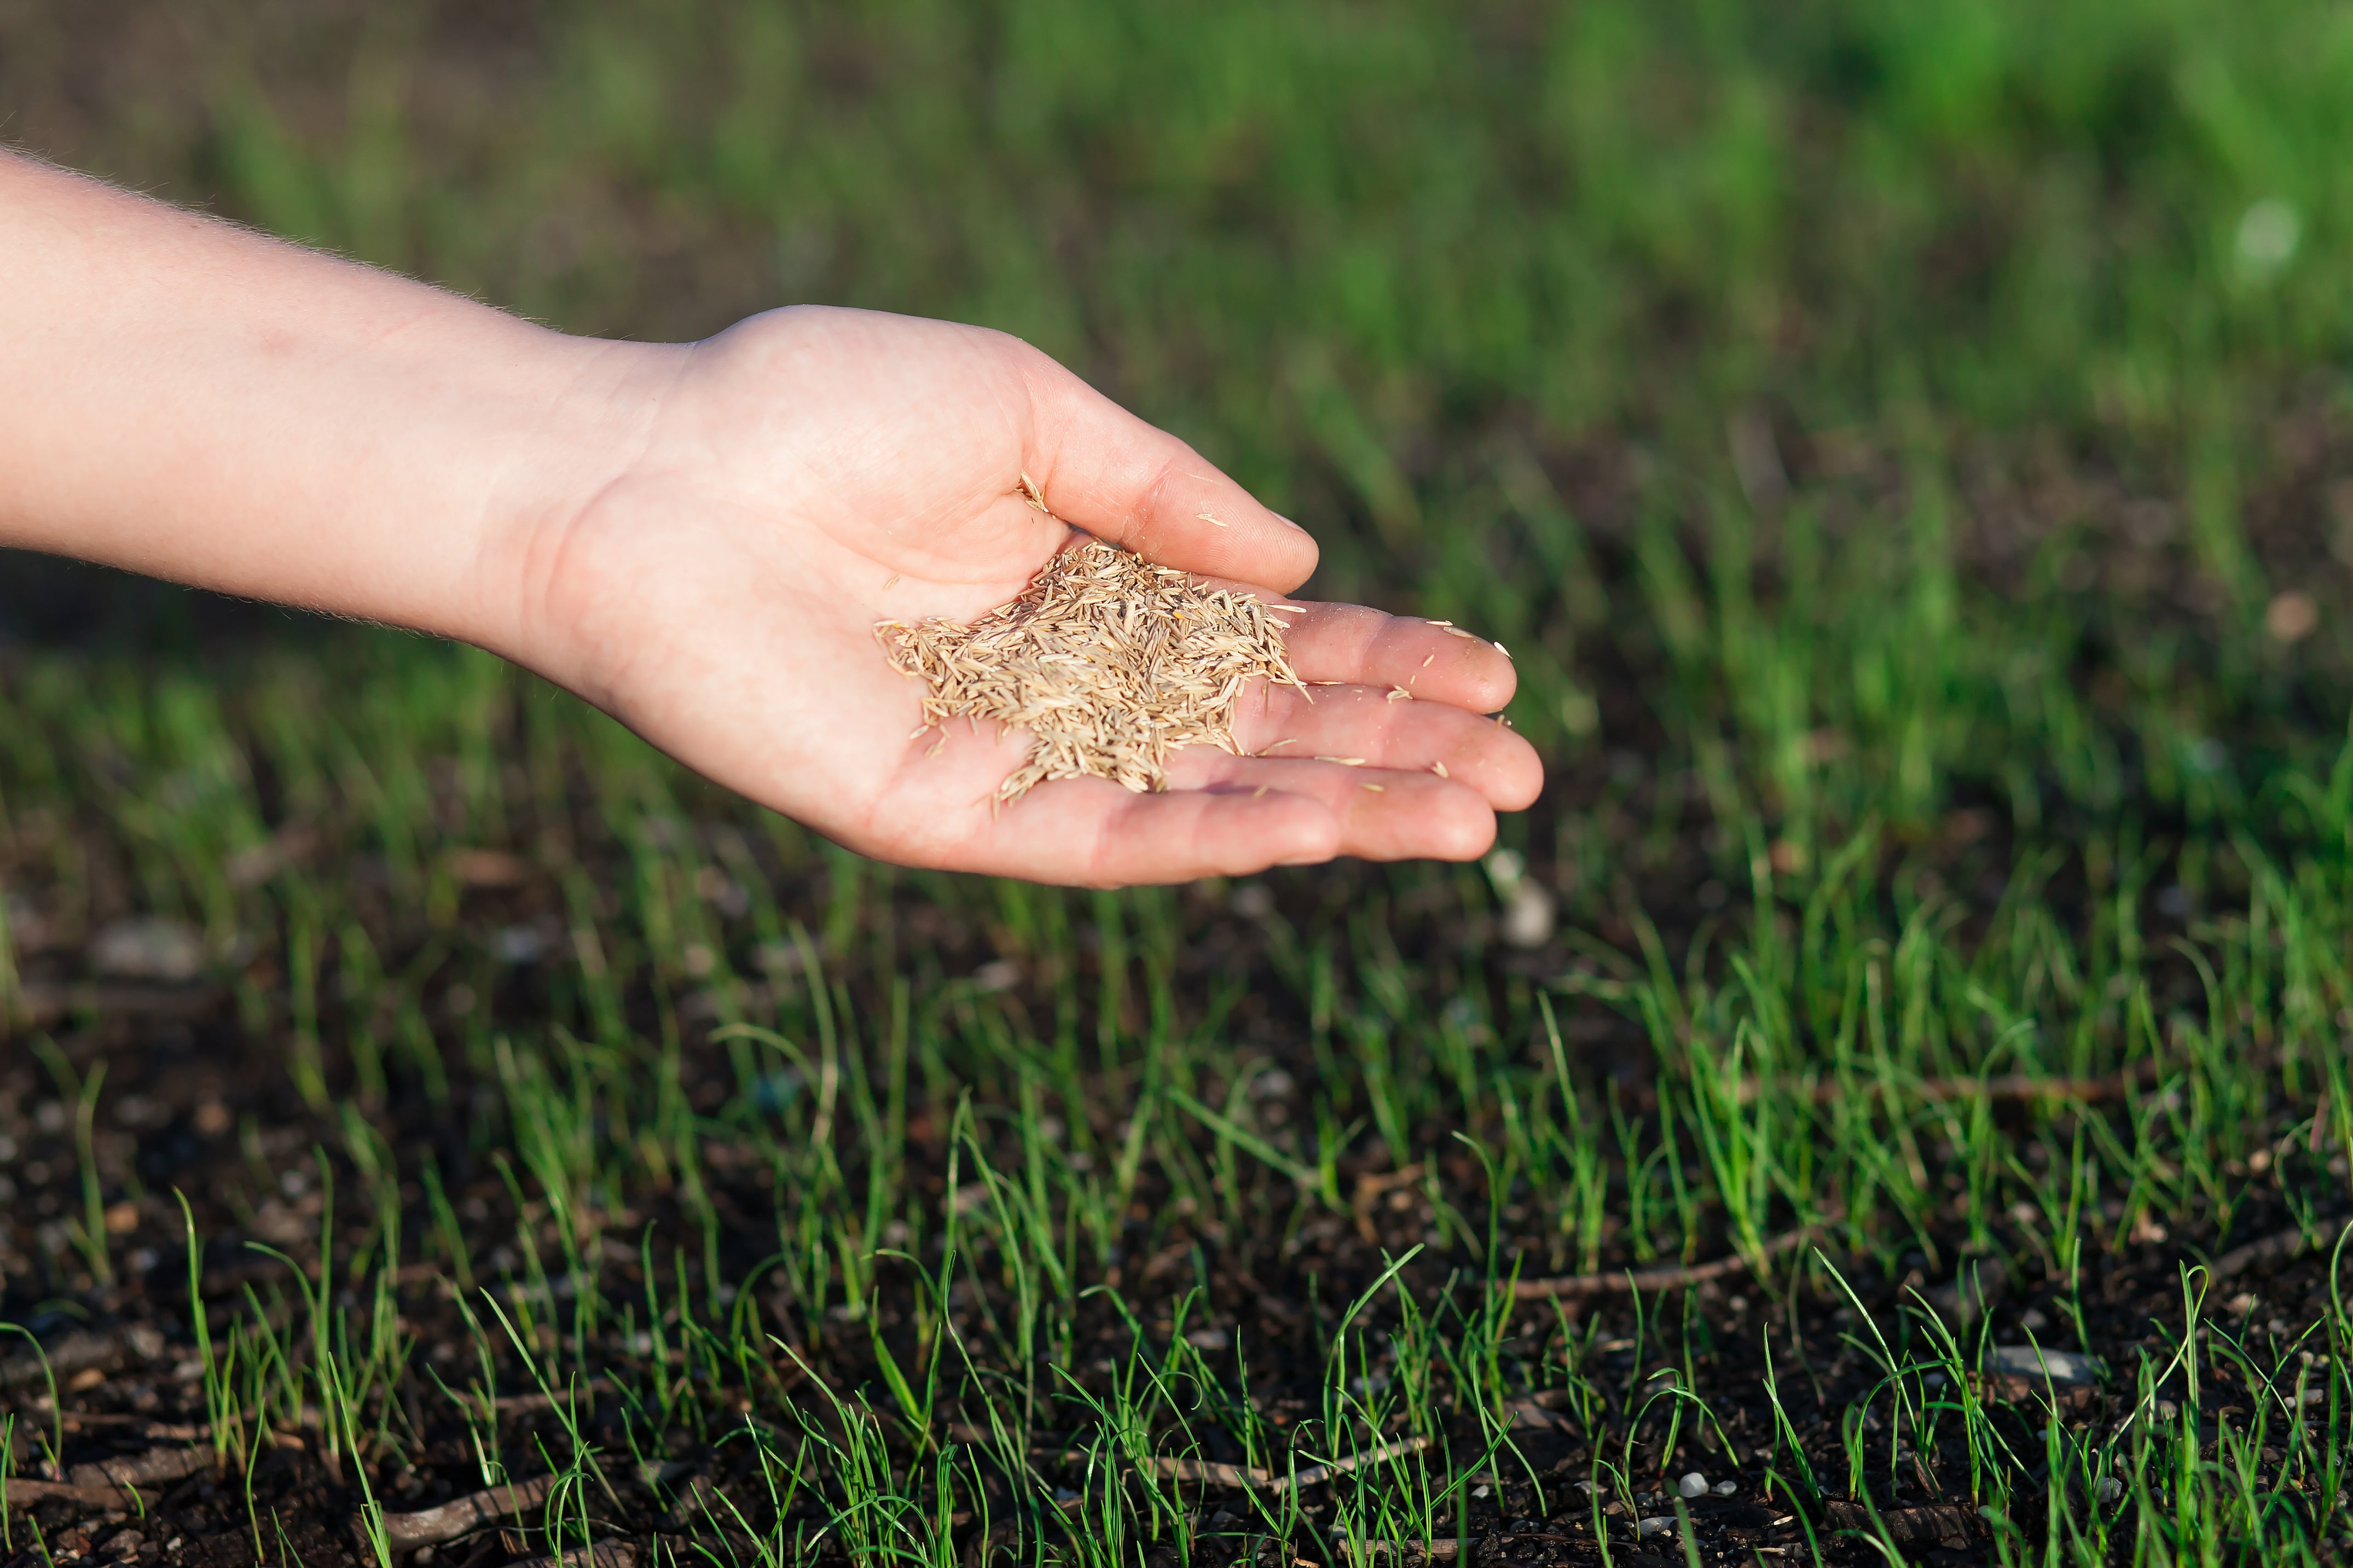 Close-up of a woman's hand shaking grass seeds. (Shallow DOF)